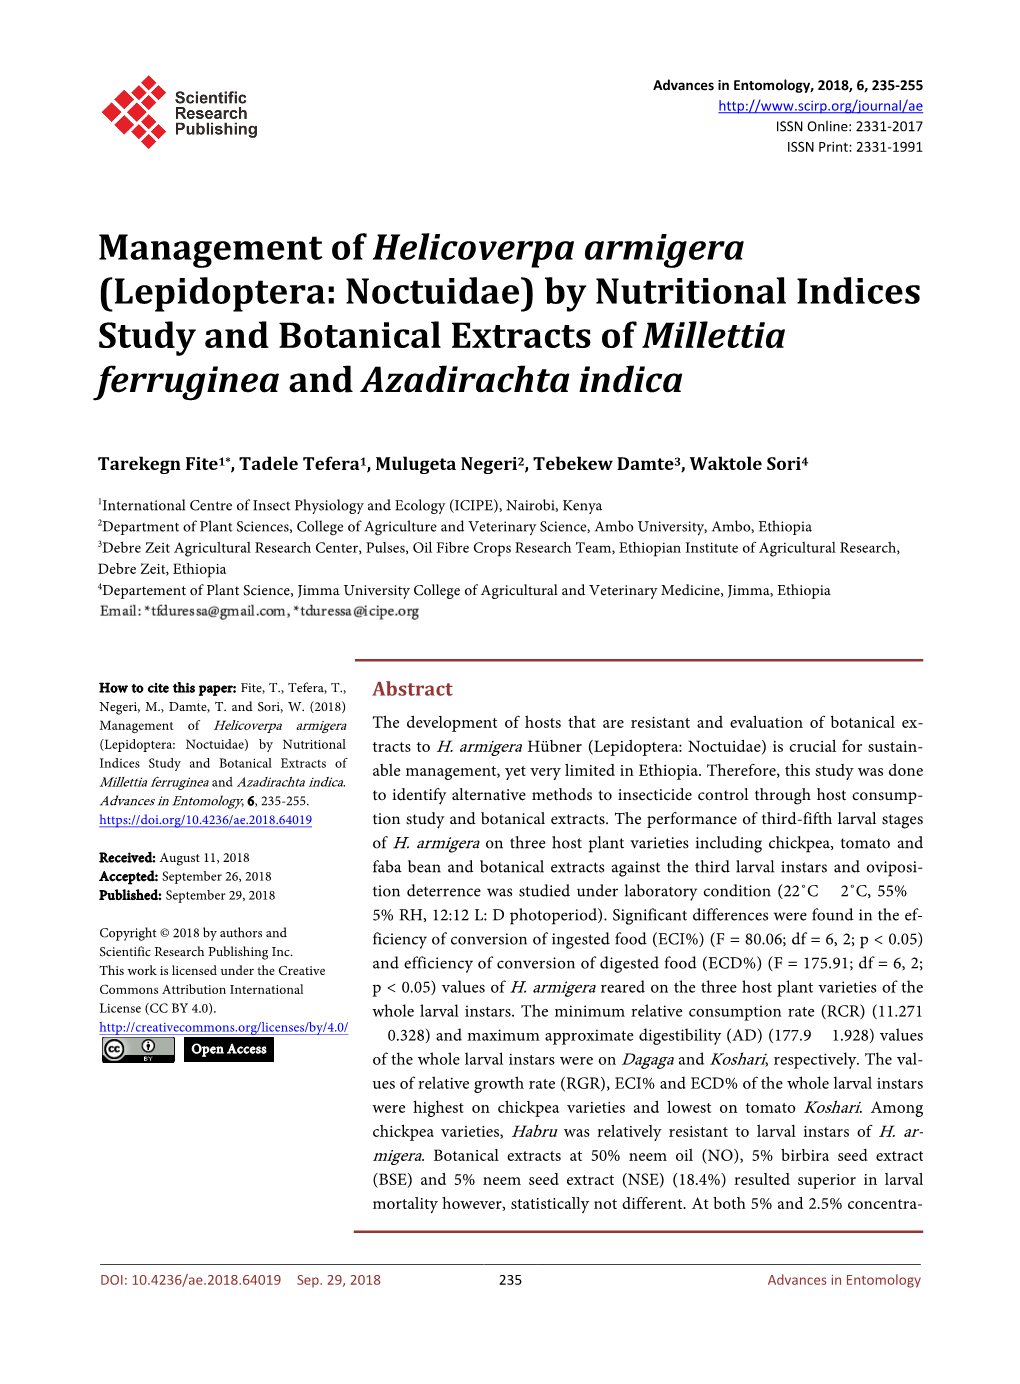 Management of Helicoverpa Armigera (Lepidoptera: Noctuidae) by Nutritional Indices Study and Botanical Extracts of Millettia Ferruginea and Azadirachta Indica